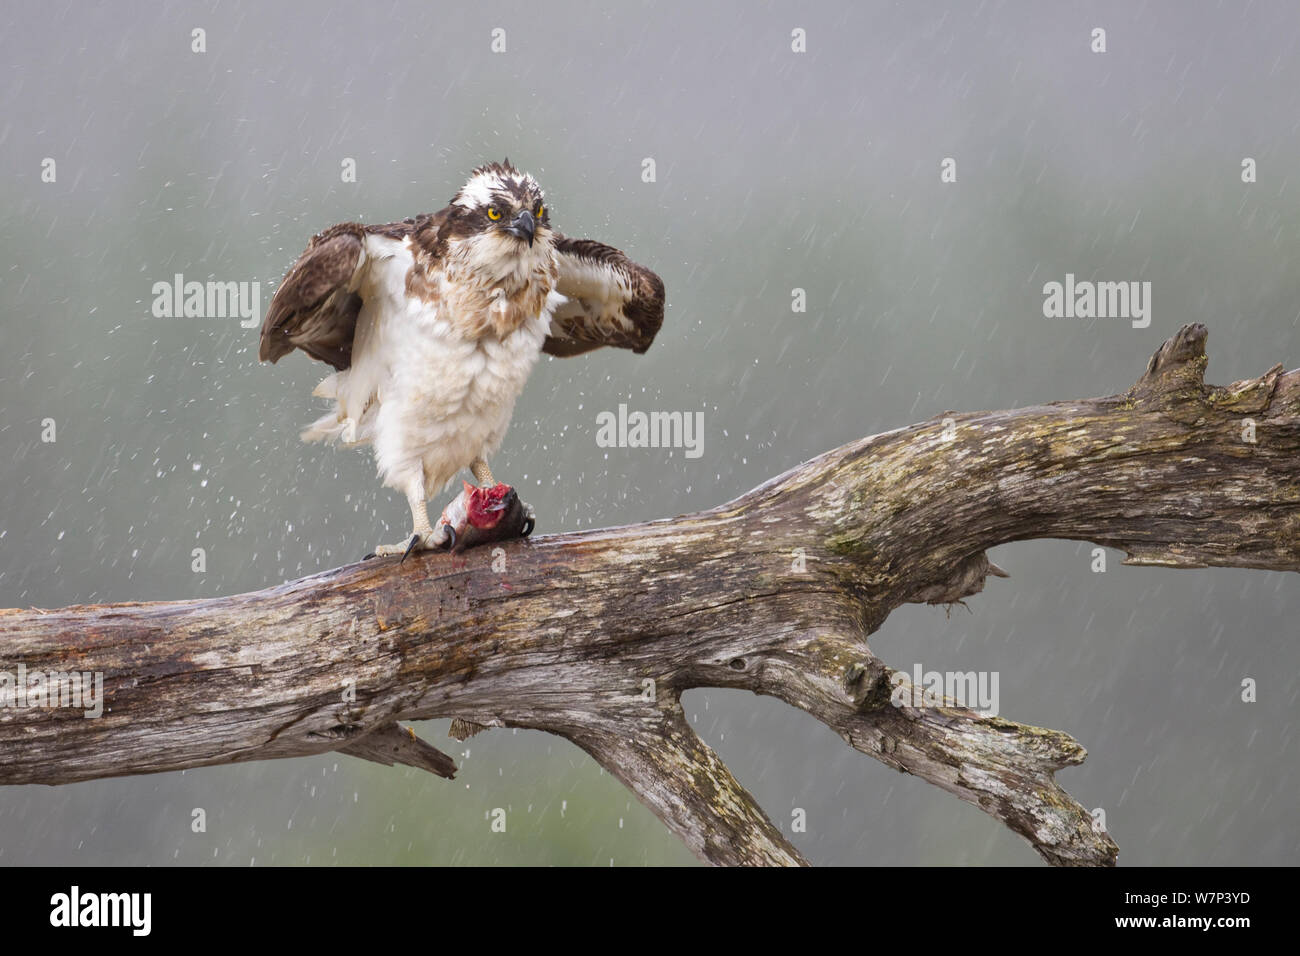 Osprey (Pandion haliaetus) on feeding perch with fish prey, shaking water from feathers, Cairngorms National Park, Scotland, UK, July. Stock Photo